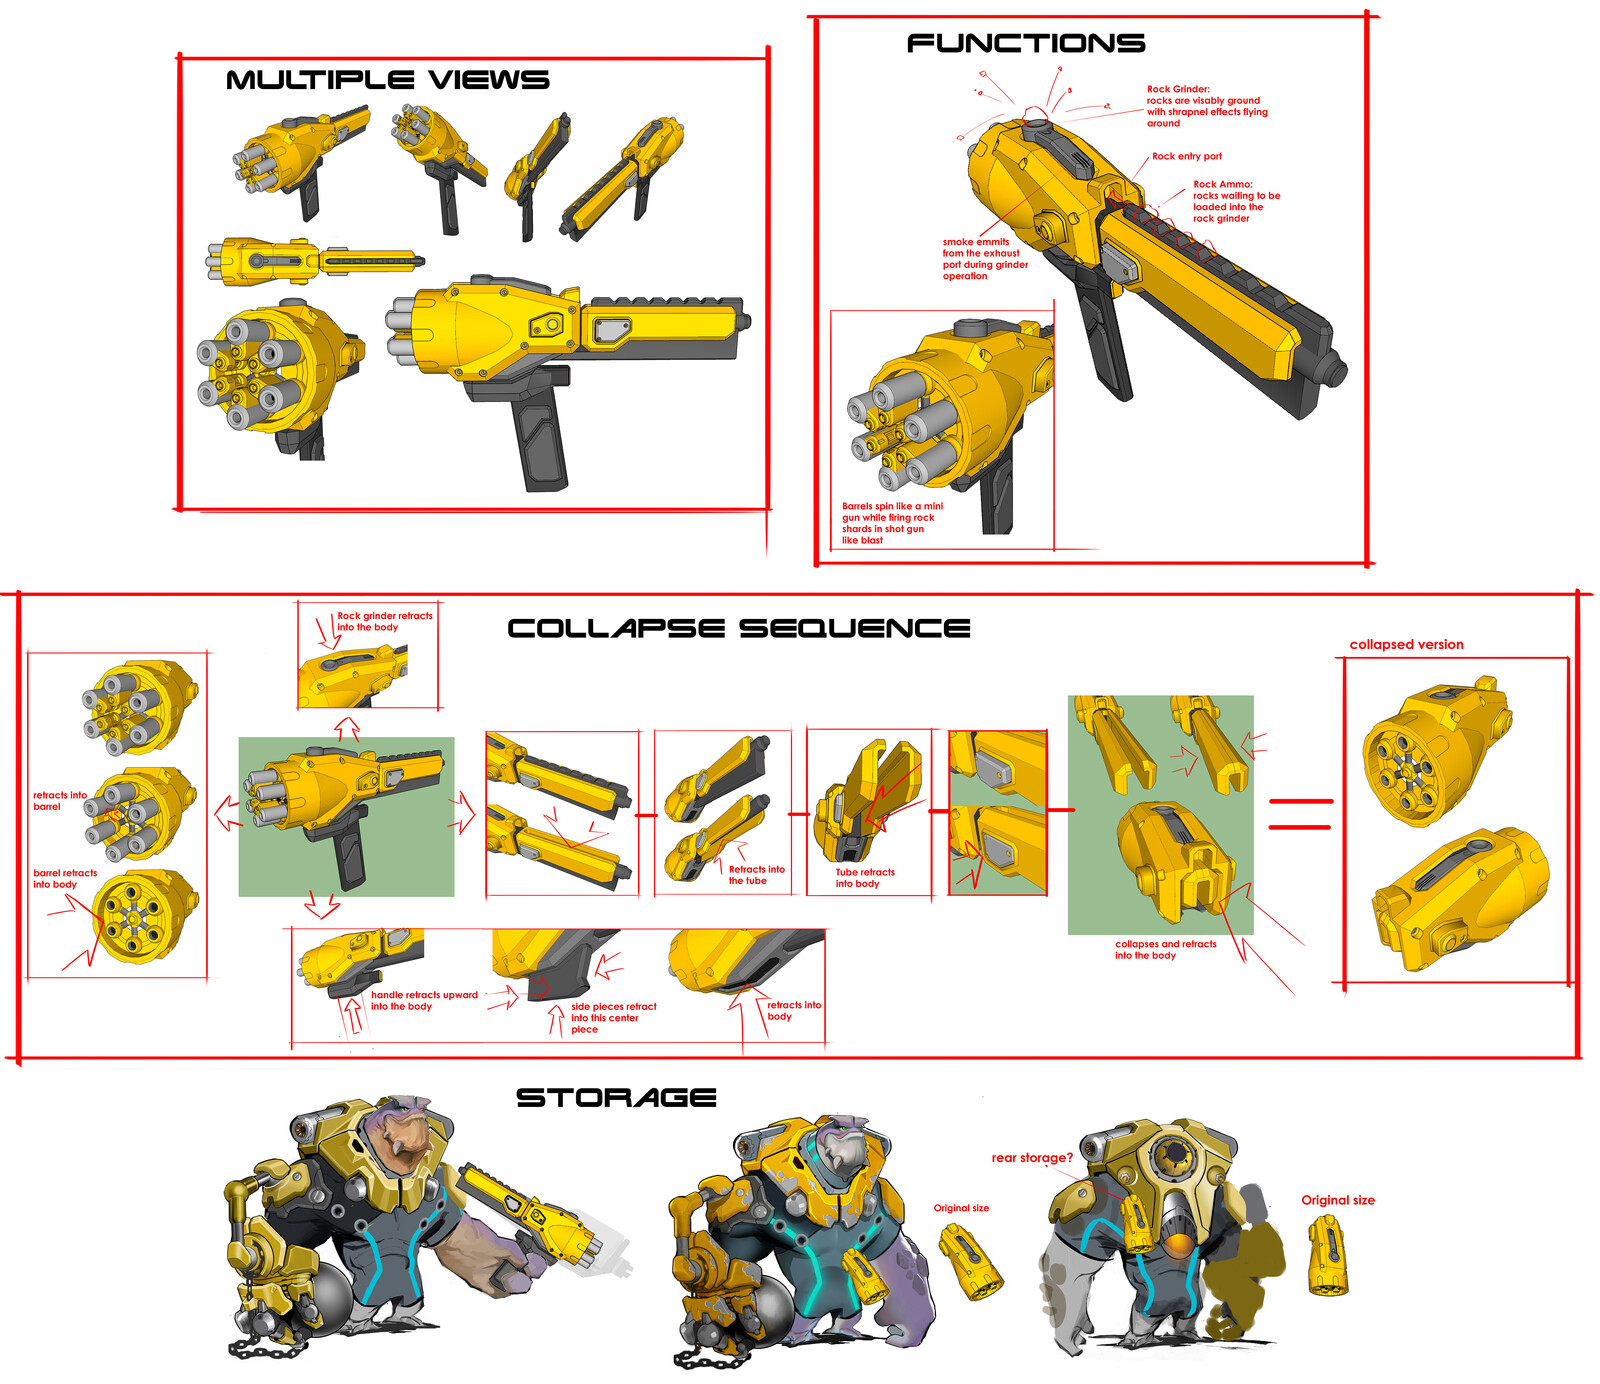 Breakdown of how the gun retracts into itself so it can be stored on the body.